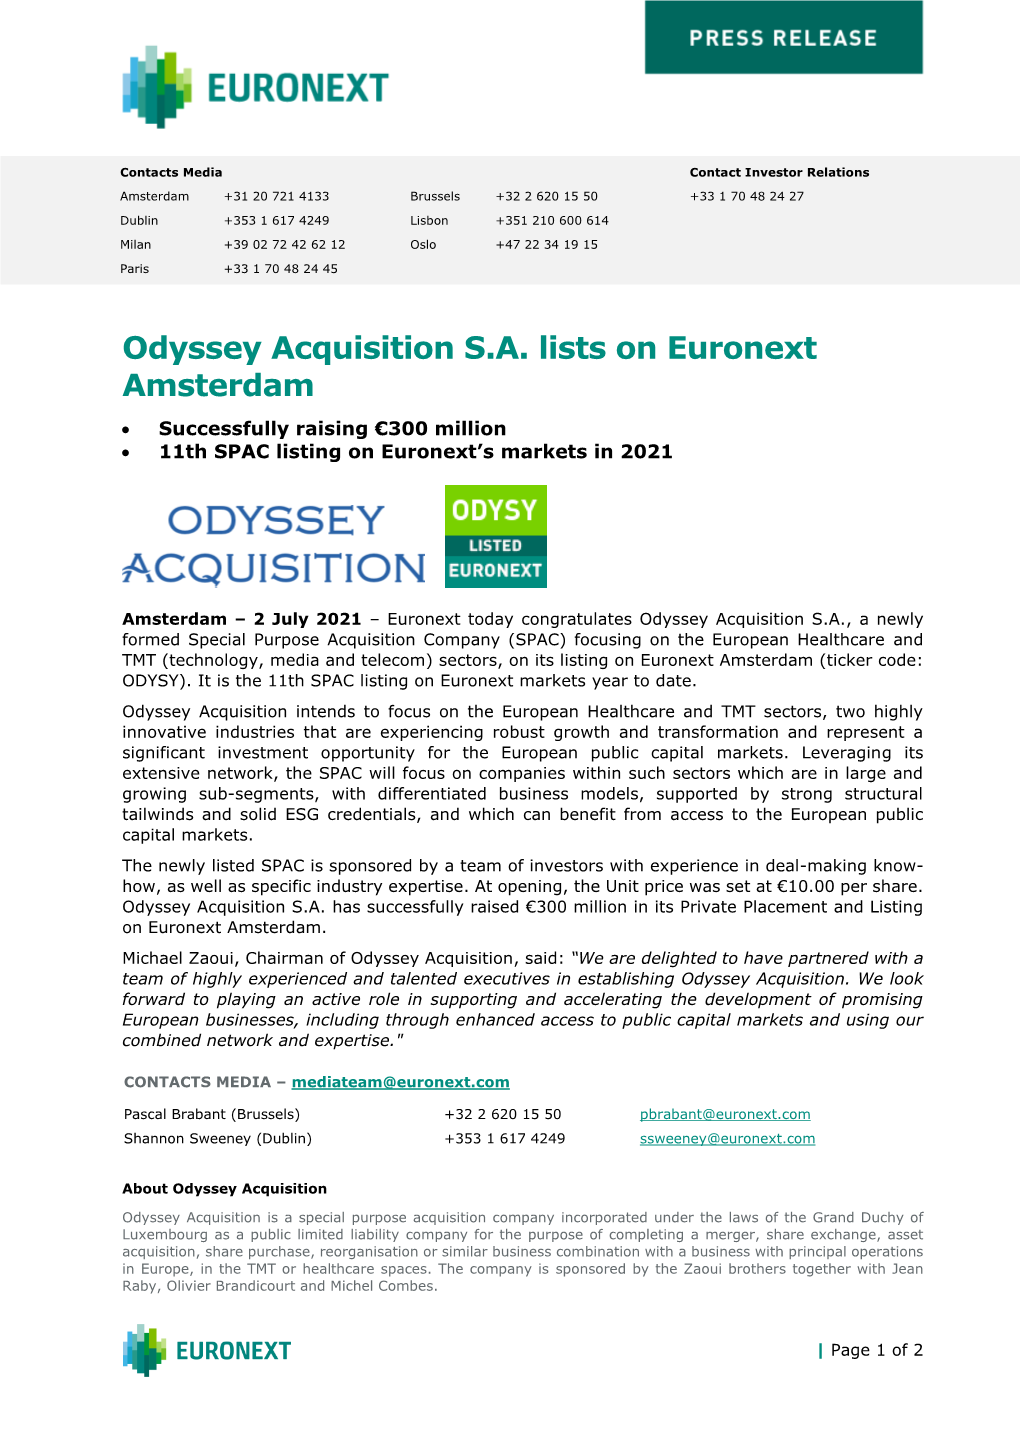 Odyssey Acquisition S.A. Lists on Euronext Amsterdam • Successfully Raising €300 Million • 11Th SPAC Listing on Euronext’S Markets in 2021